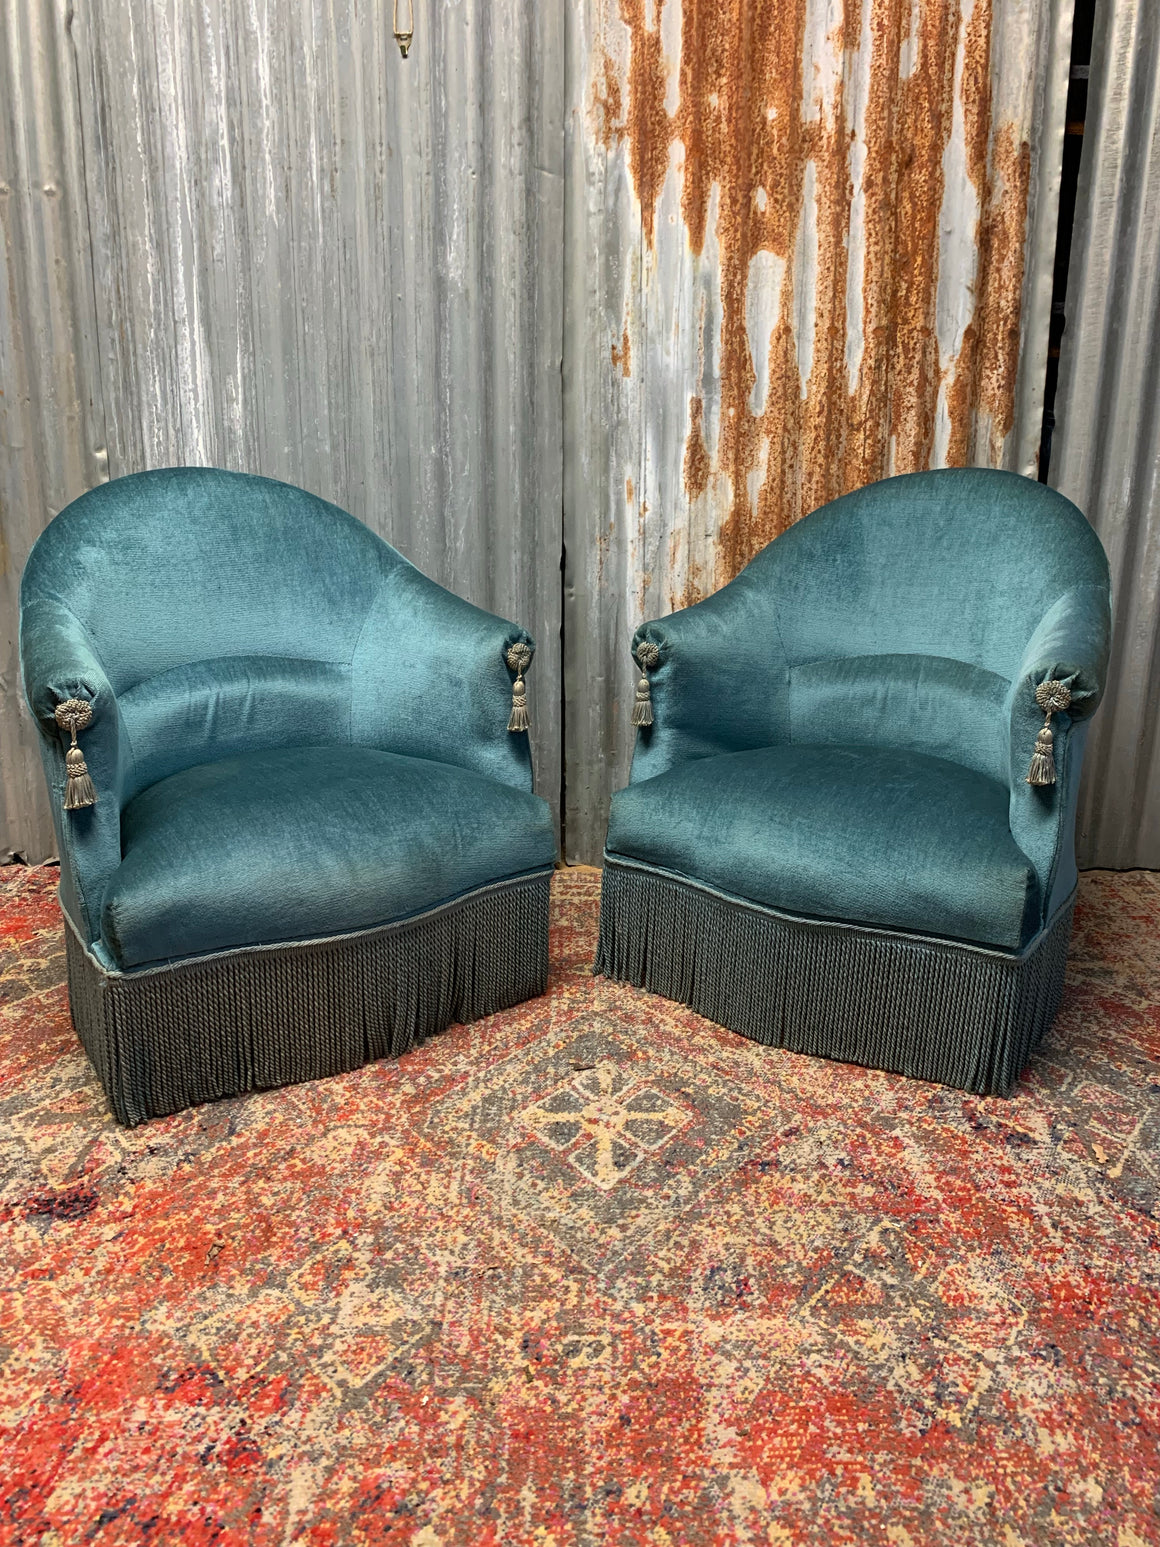 A pair of blue French chairs